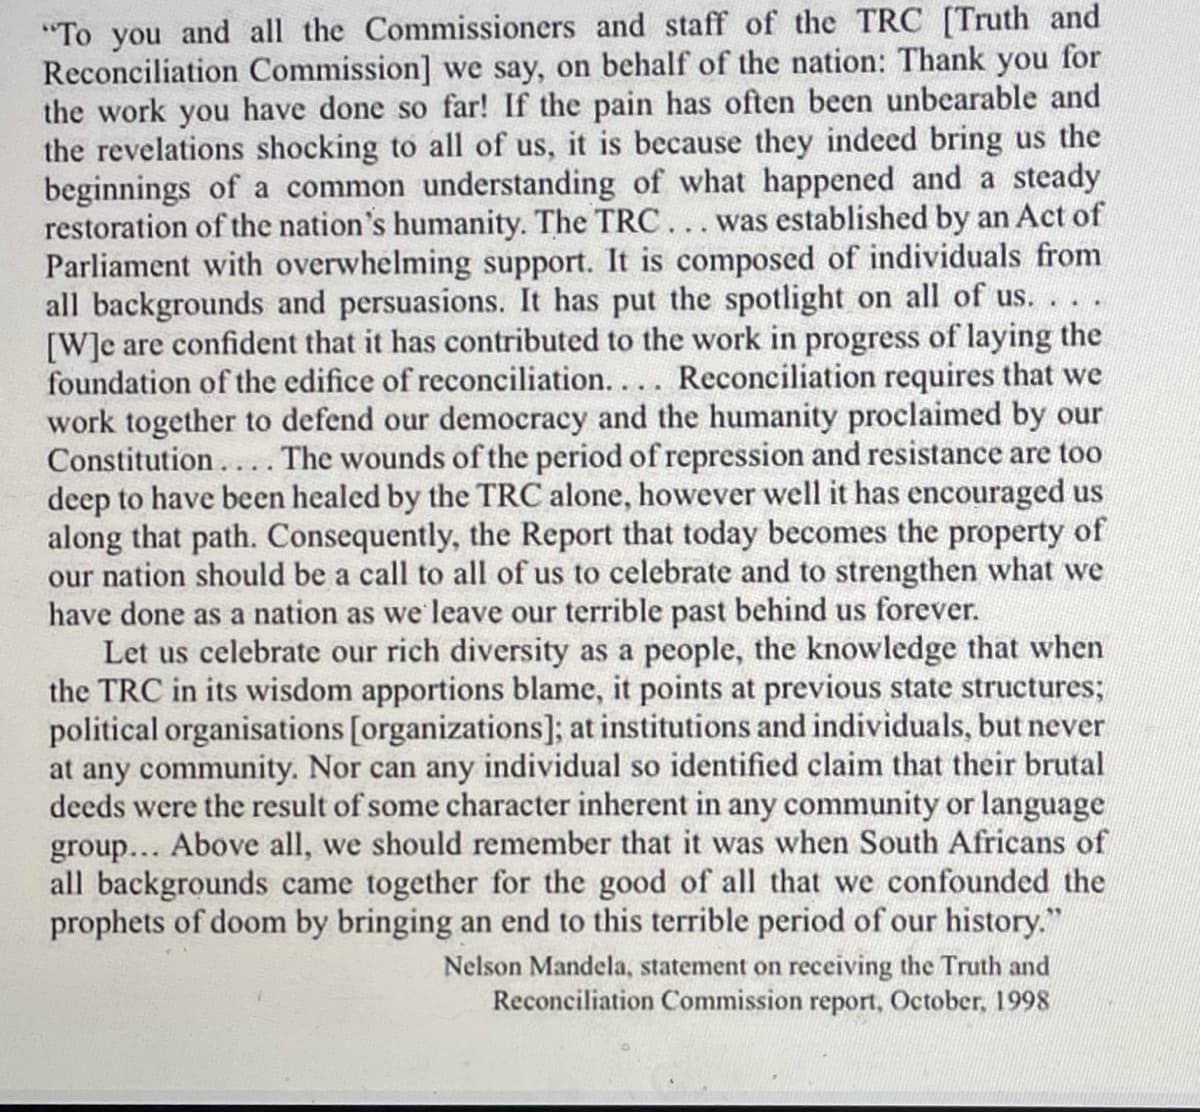 "To you and all the Commissioners and staff of the TRC [Truth and
Reconciliation Commission] we say, on behalf of the nation: Thank you for
the work you have done so far! If the pain has often been unbearable and
the revelations shocking to all of us, it is because they indeed bring us the
beginnings of a common understanding of what happened and a steady
restoration of the nation's humanity. The TRC... was established by an Act of
Parliament with overwhelming support. It is composed of individuals from
all backgrounds and persuasions. It has put the spotlight on all of us. . . .
[W]e are confident that it has contributed to the work in progress of laying the
foundation of the edifice of reconciliation... Reconciliation requires that we
work together to defend our democracy and the humanity proclaimed by our
Constitution.... The wounds of the period of repression and resistance are too
deep to have been healed by the TRC alone, however well it has encouraged us
along that path. Consequently, the Report that today becomes the property of
our nation should be a call to all of us to celebrate and to strengthen what we
have done as a nation as we leave our terrible past behind us forever.
Let us celebrate our rich diversity as a people, the knowledge that when
the TRC in its wisdom apportions blame, it points at previous state structures;
political organisations [organizations]; at institutions and individuals, but never
at any community. Nor can any individual so identified claim that their brutal
deeds were the result of some character inherent in any community or language
group... Above all, we should remember that it was when South Africans of
all backgrounds came together for the good of all that we confounded the
prophets of doom by bringing an end to this terrible period of our history."
Nelson Mandela, statement on receiving the Truth and
Reconciliation Commission report, October, 1998
